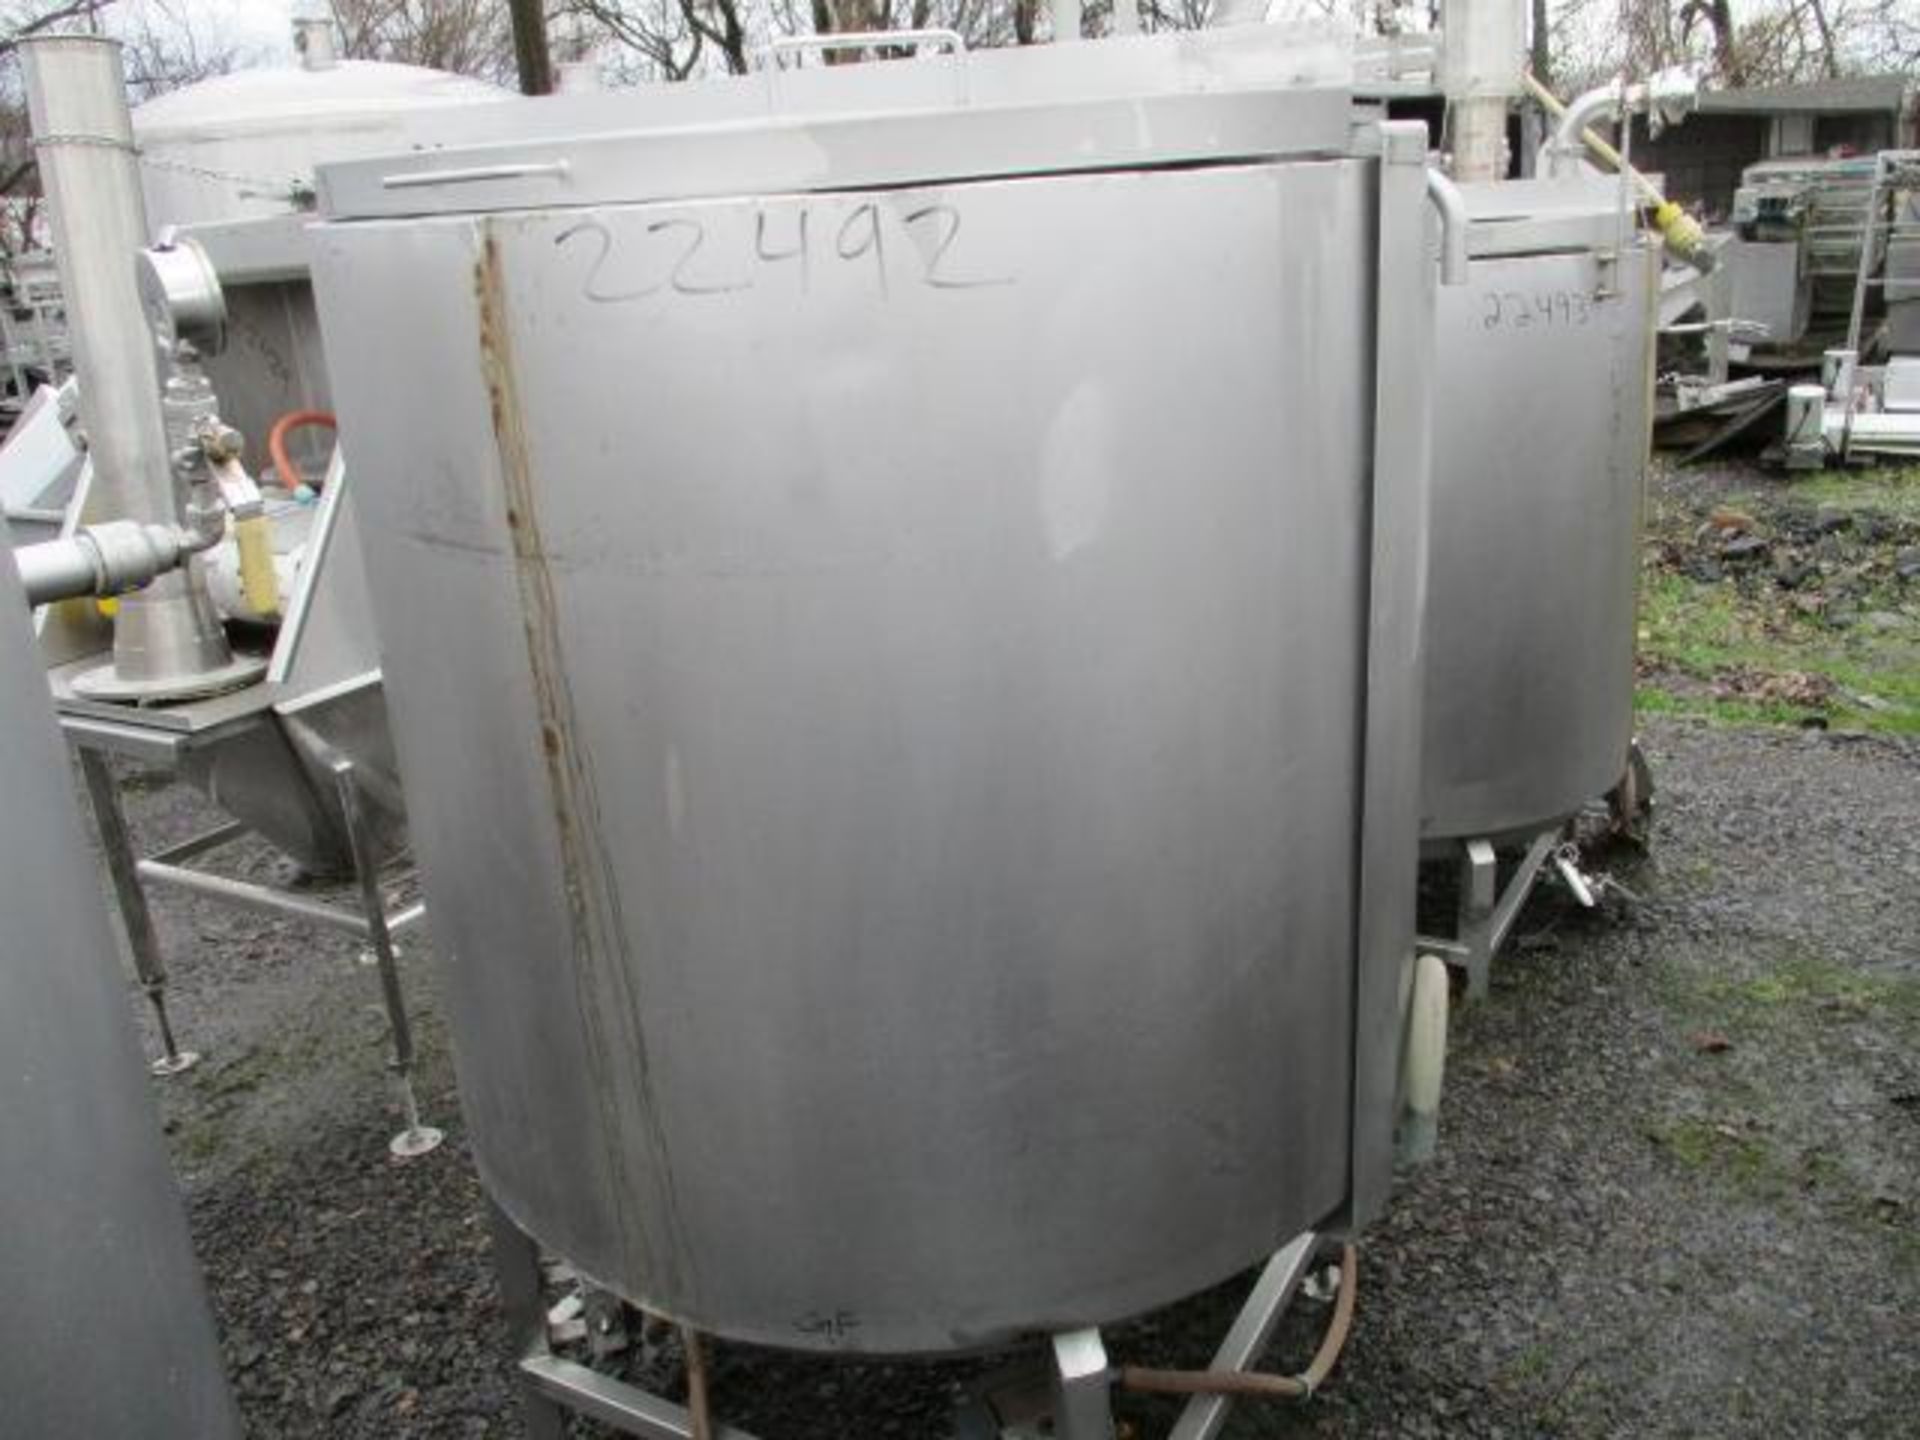 300 GALLON JACKETED STAINLESS STEEL TANK, MEASURES 4' DEEP AND 44" DIAMETER - Image 4 of 5